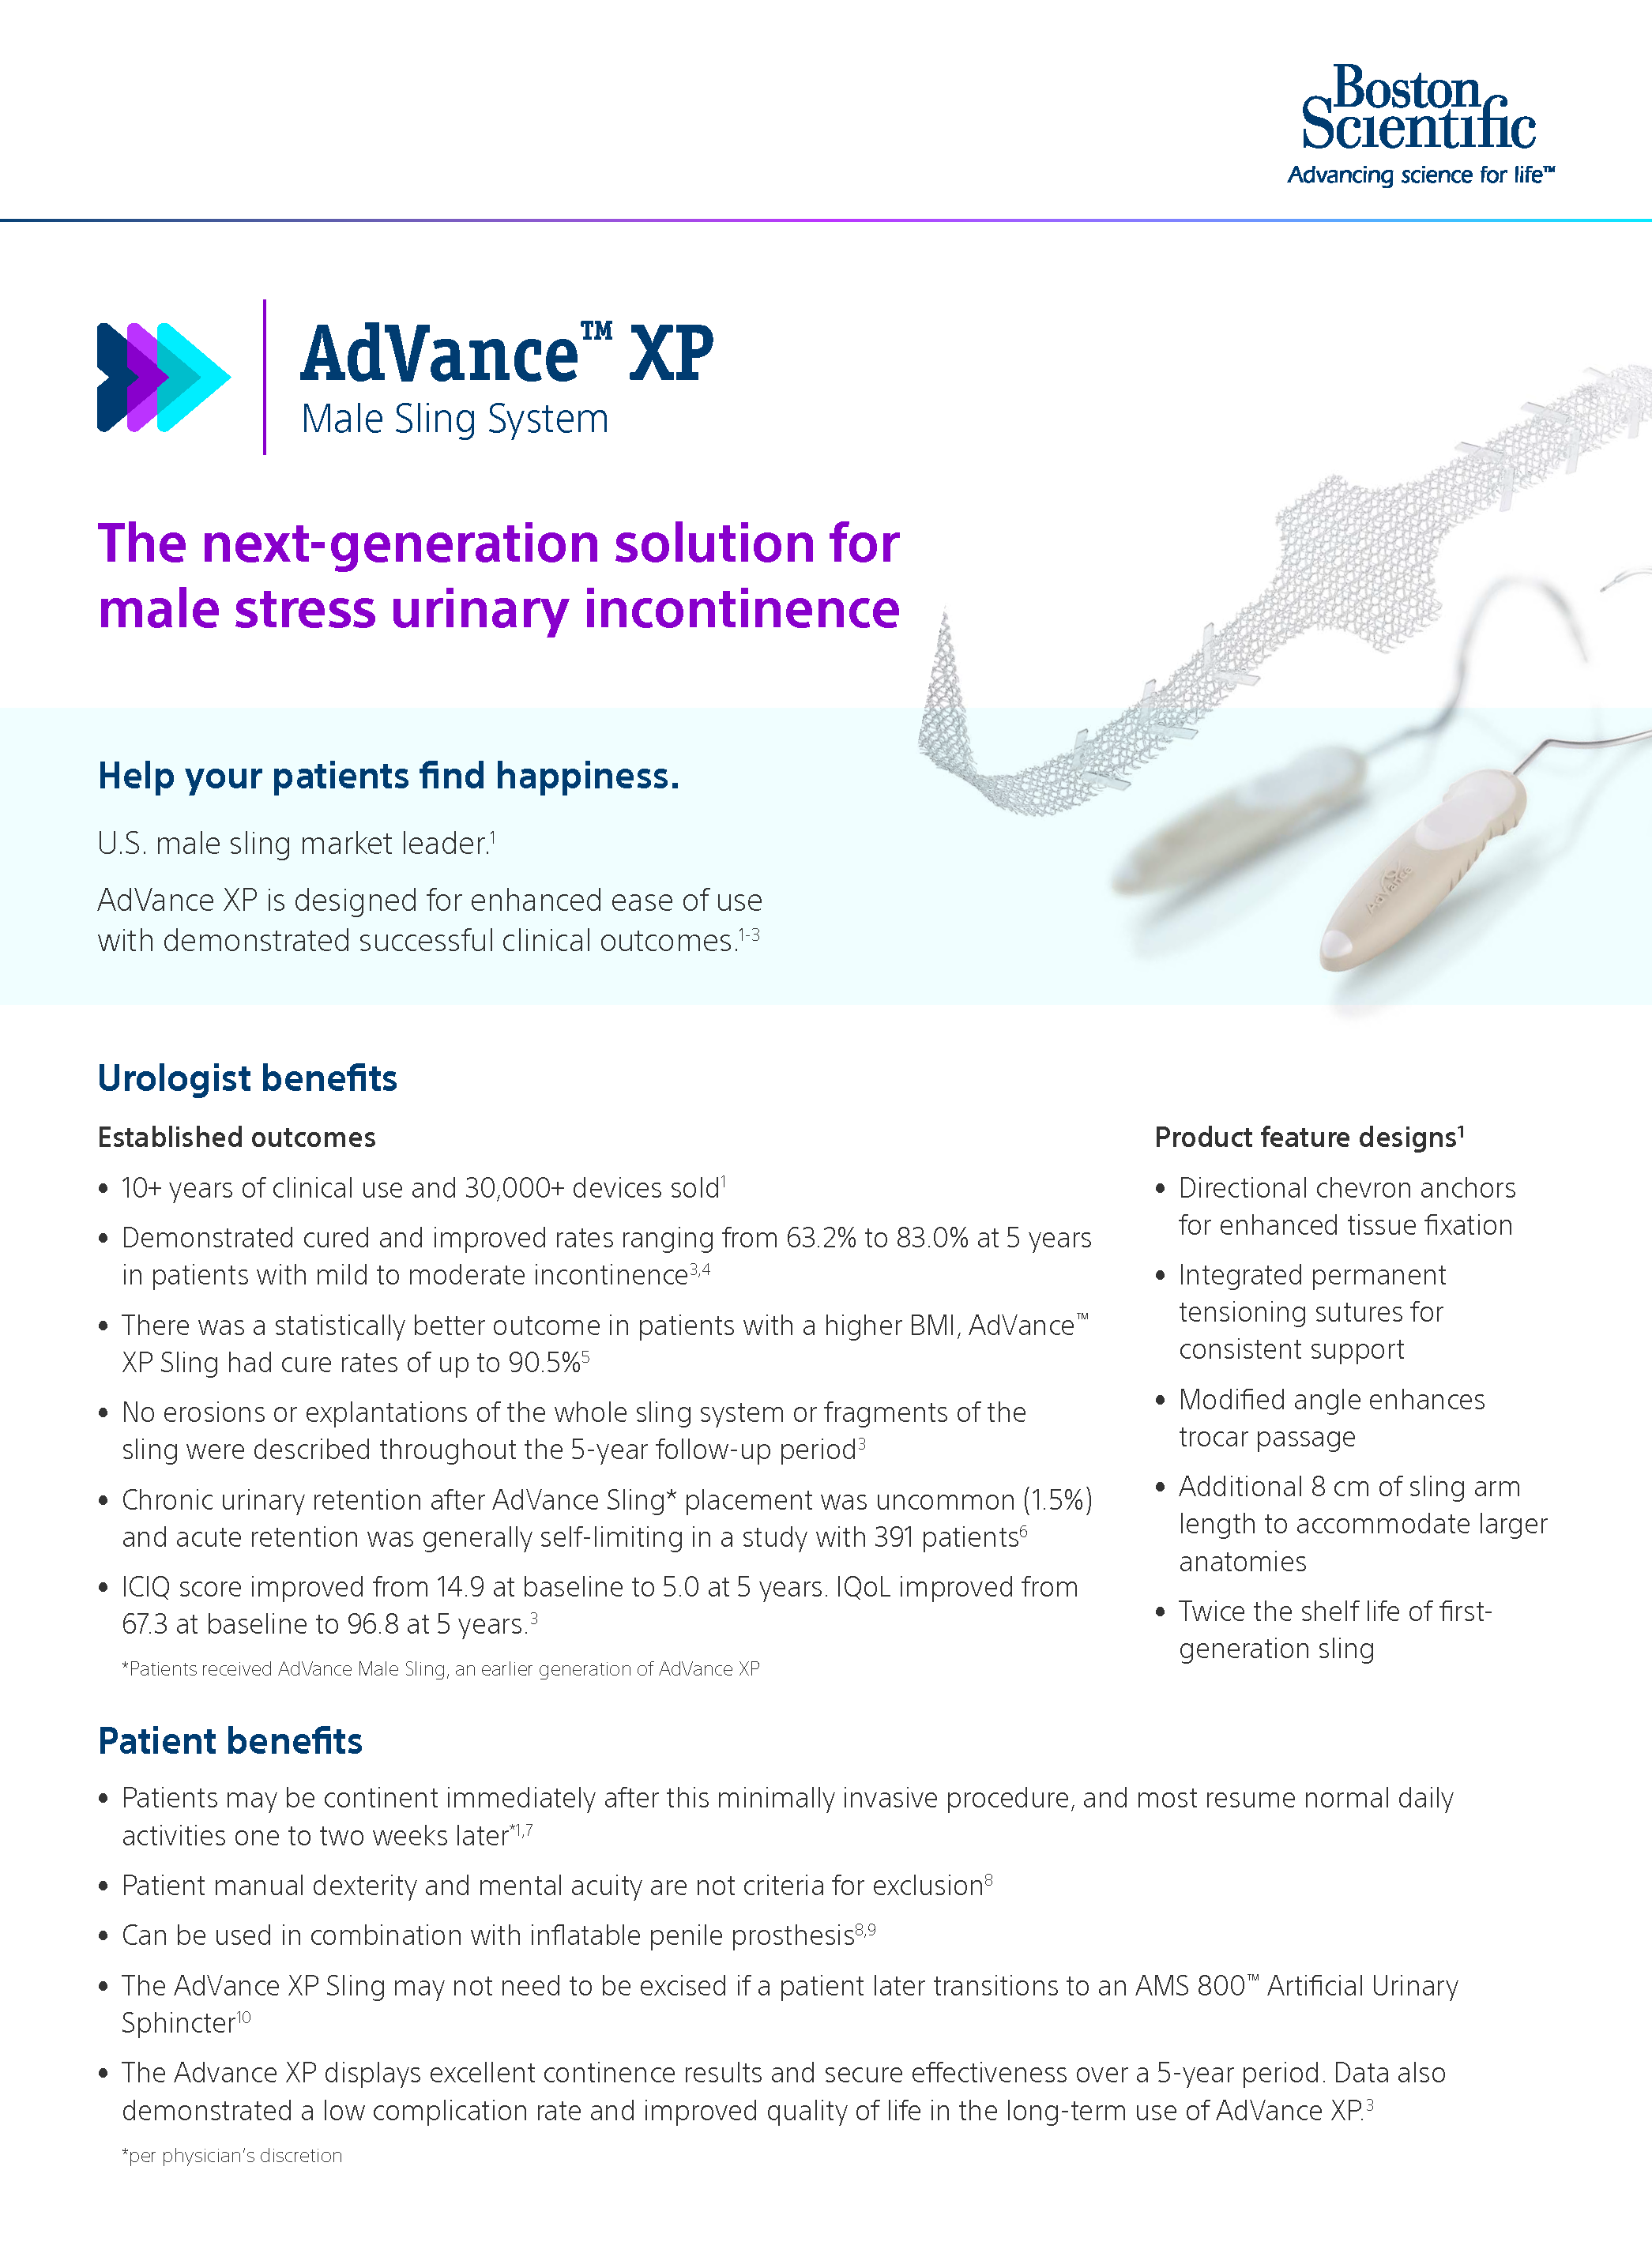 AdVance™ XP Product Overview